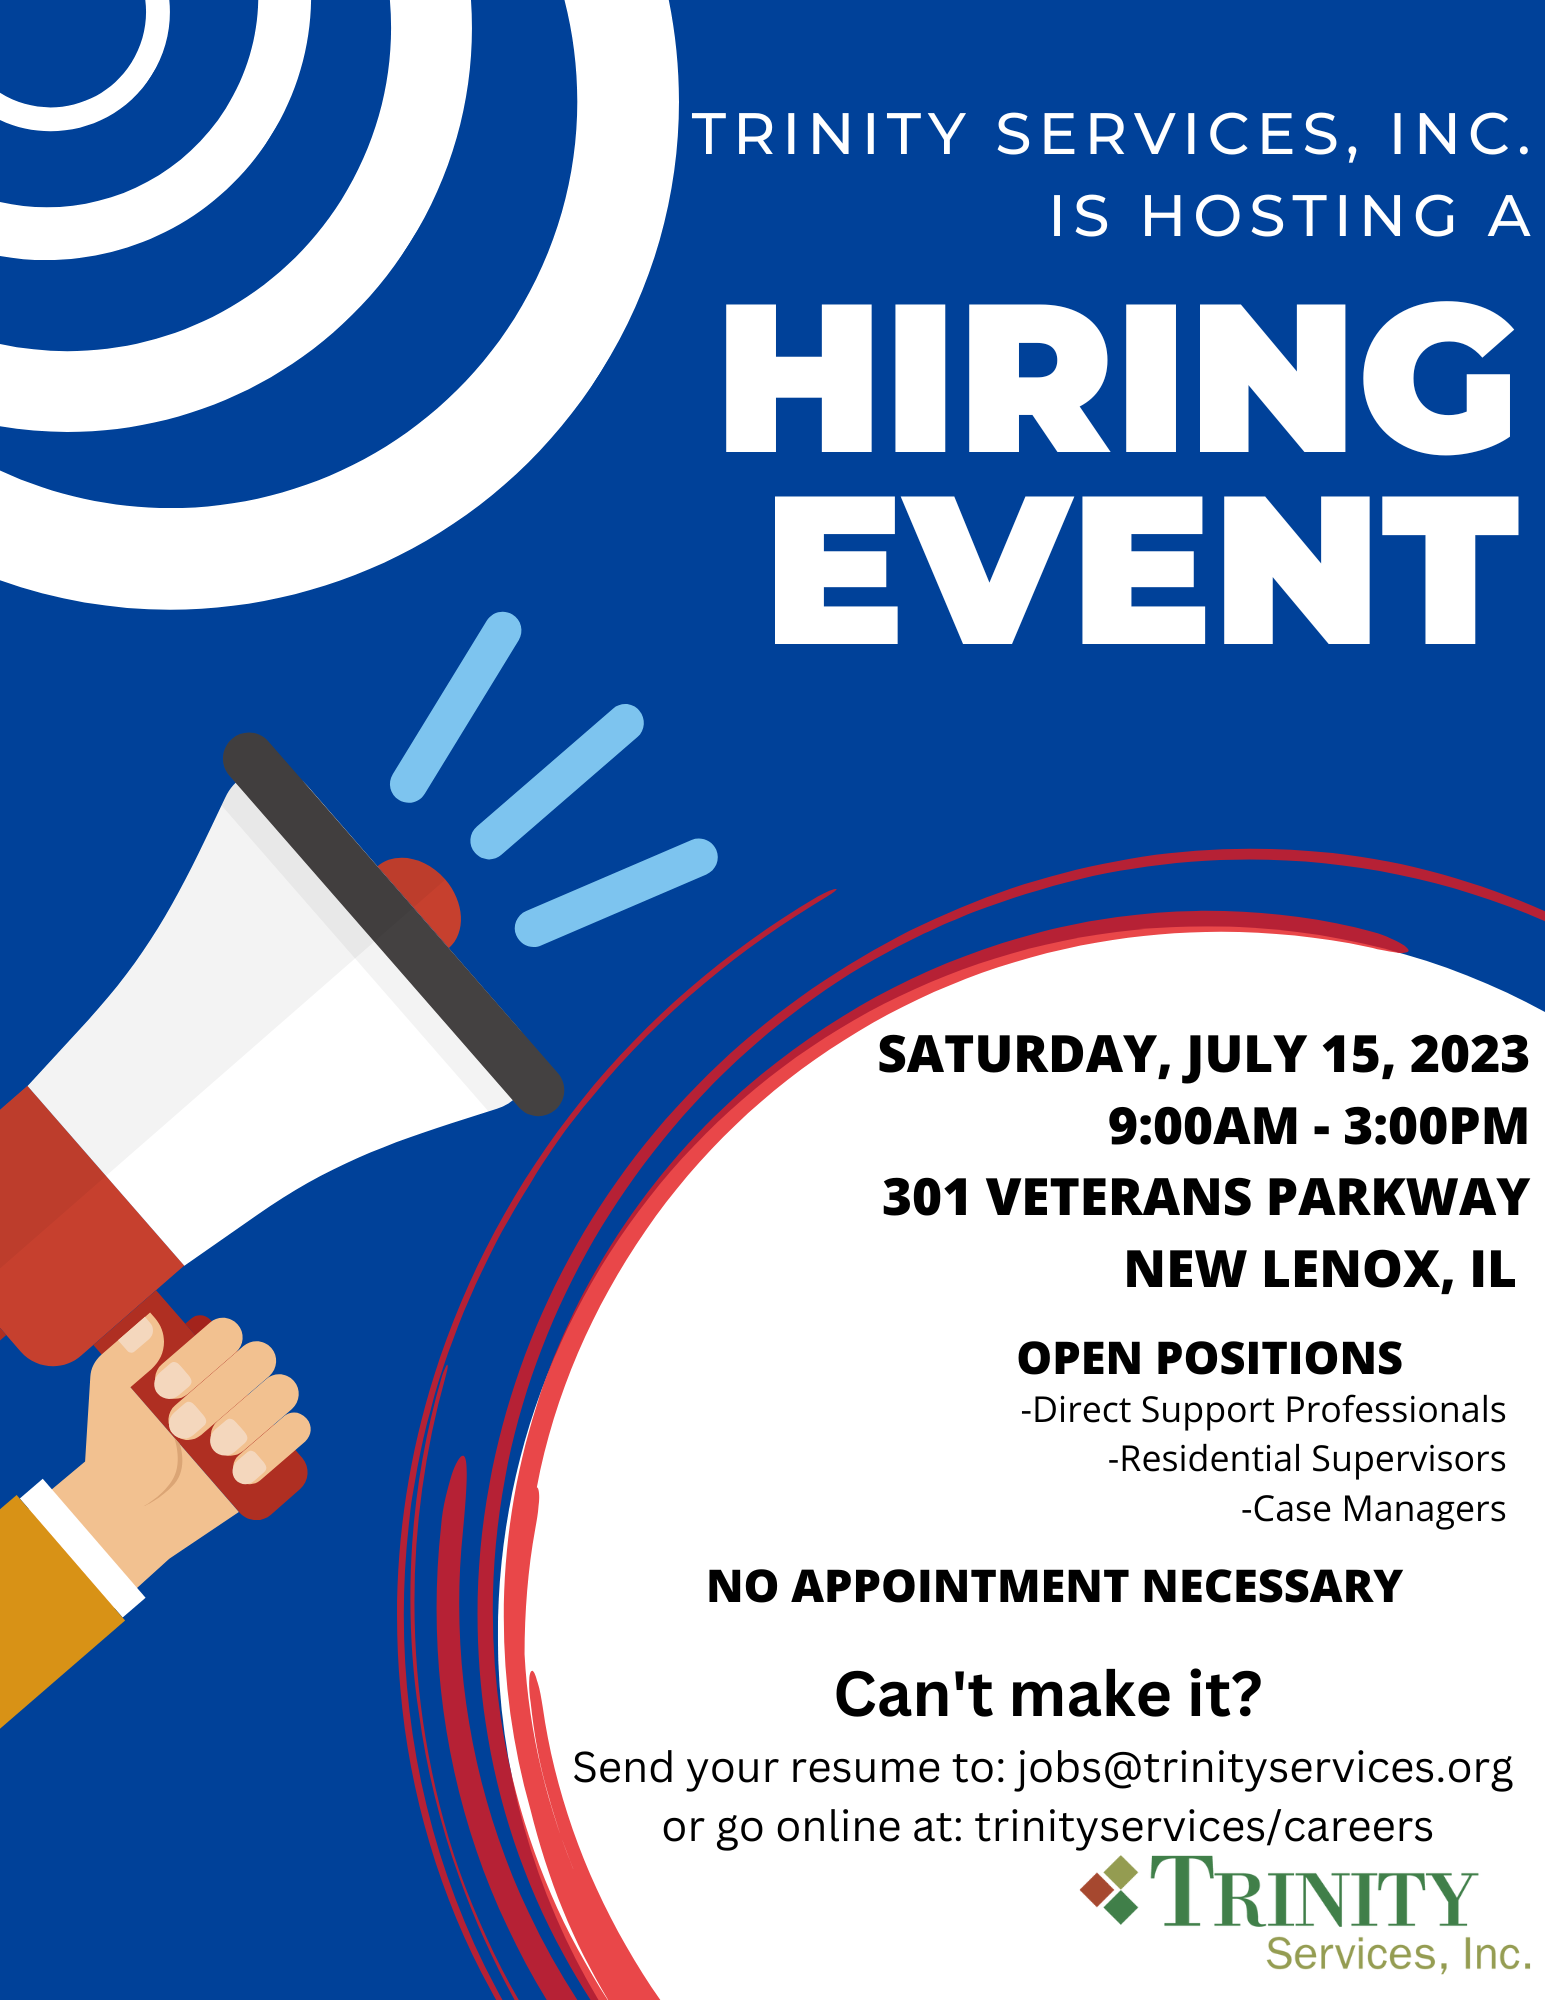 Trinity Services Hiring Event 7.15.23 Announcement